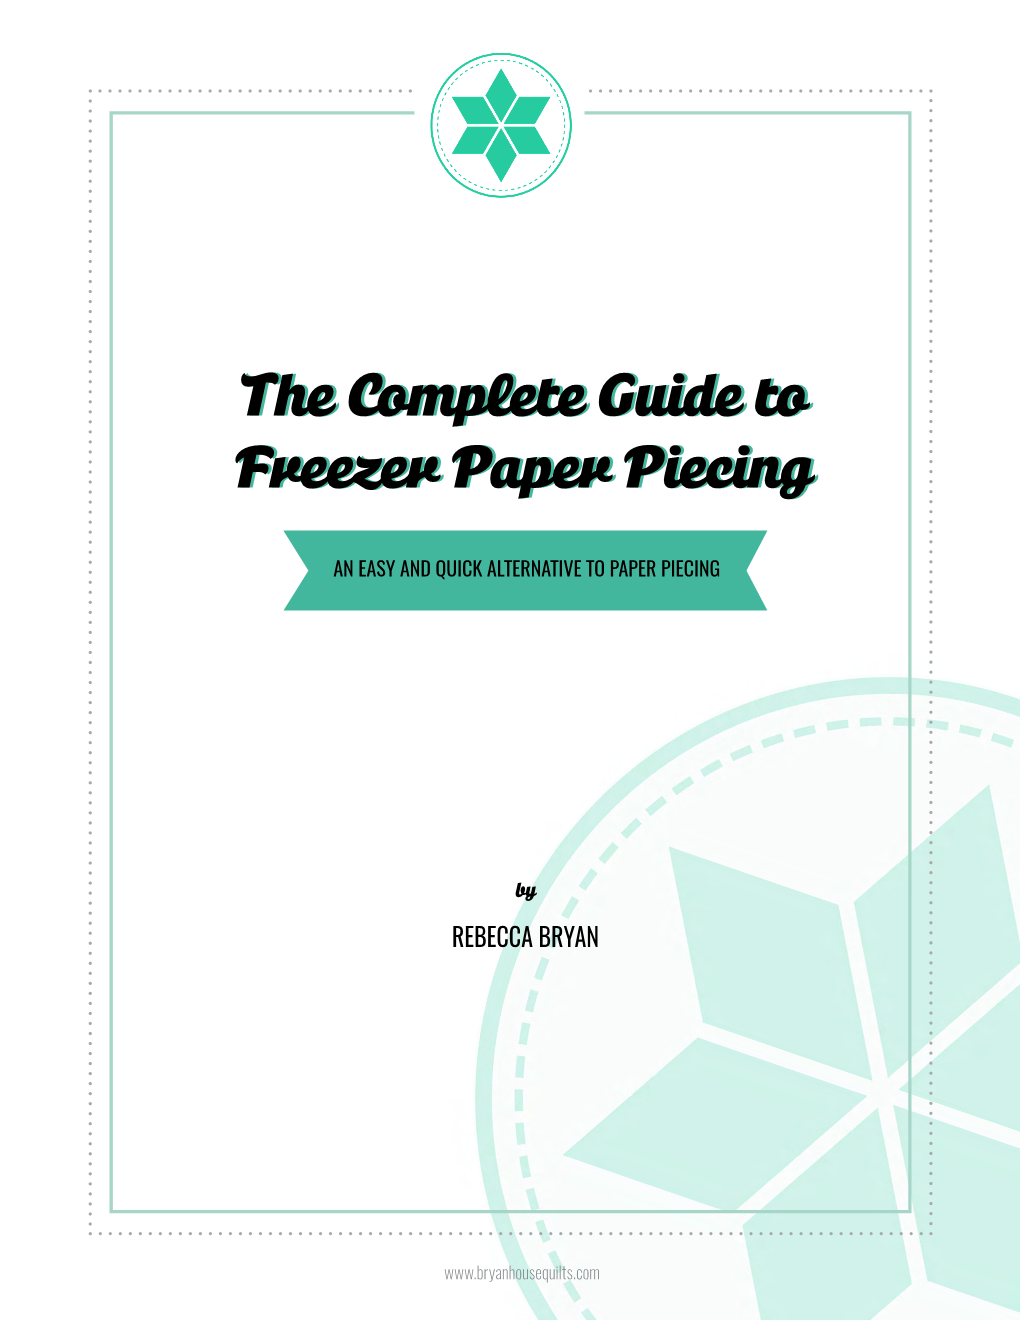 The Complete Guide to Freezer Paper Piecing